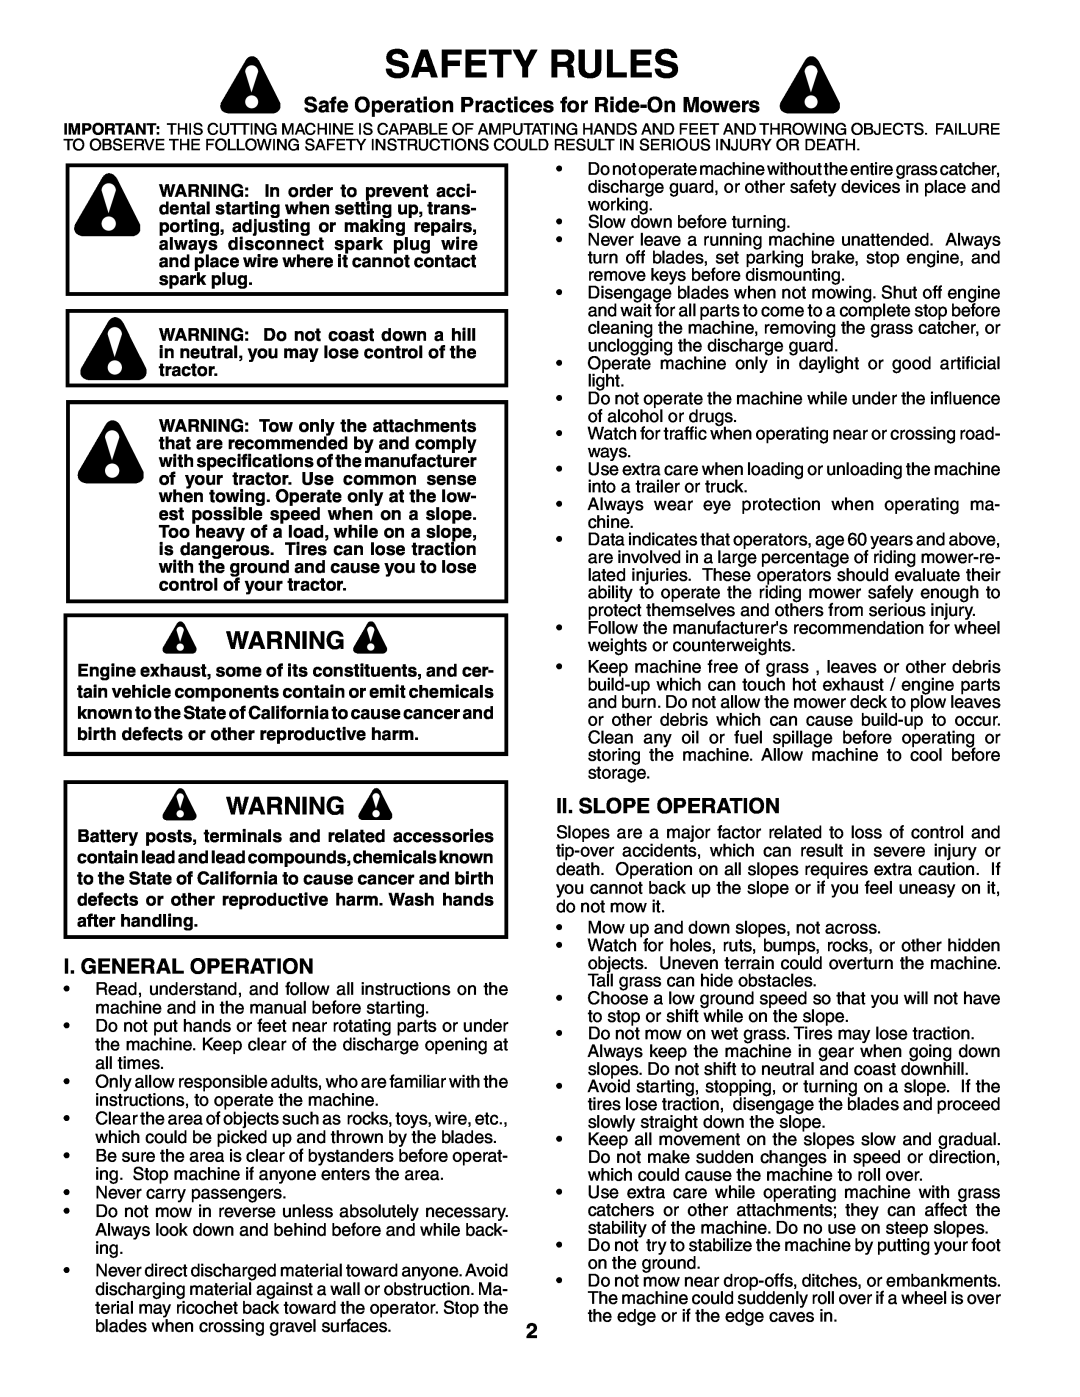 Poulan PB1638LT manual Safety Rules, Safe Operation Practices for Ride-OnMowers, I. General Operation, Ii. Slope Operation 